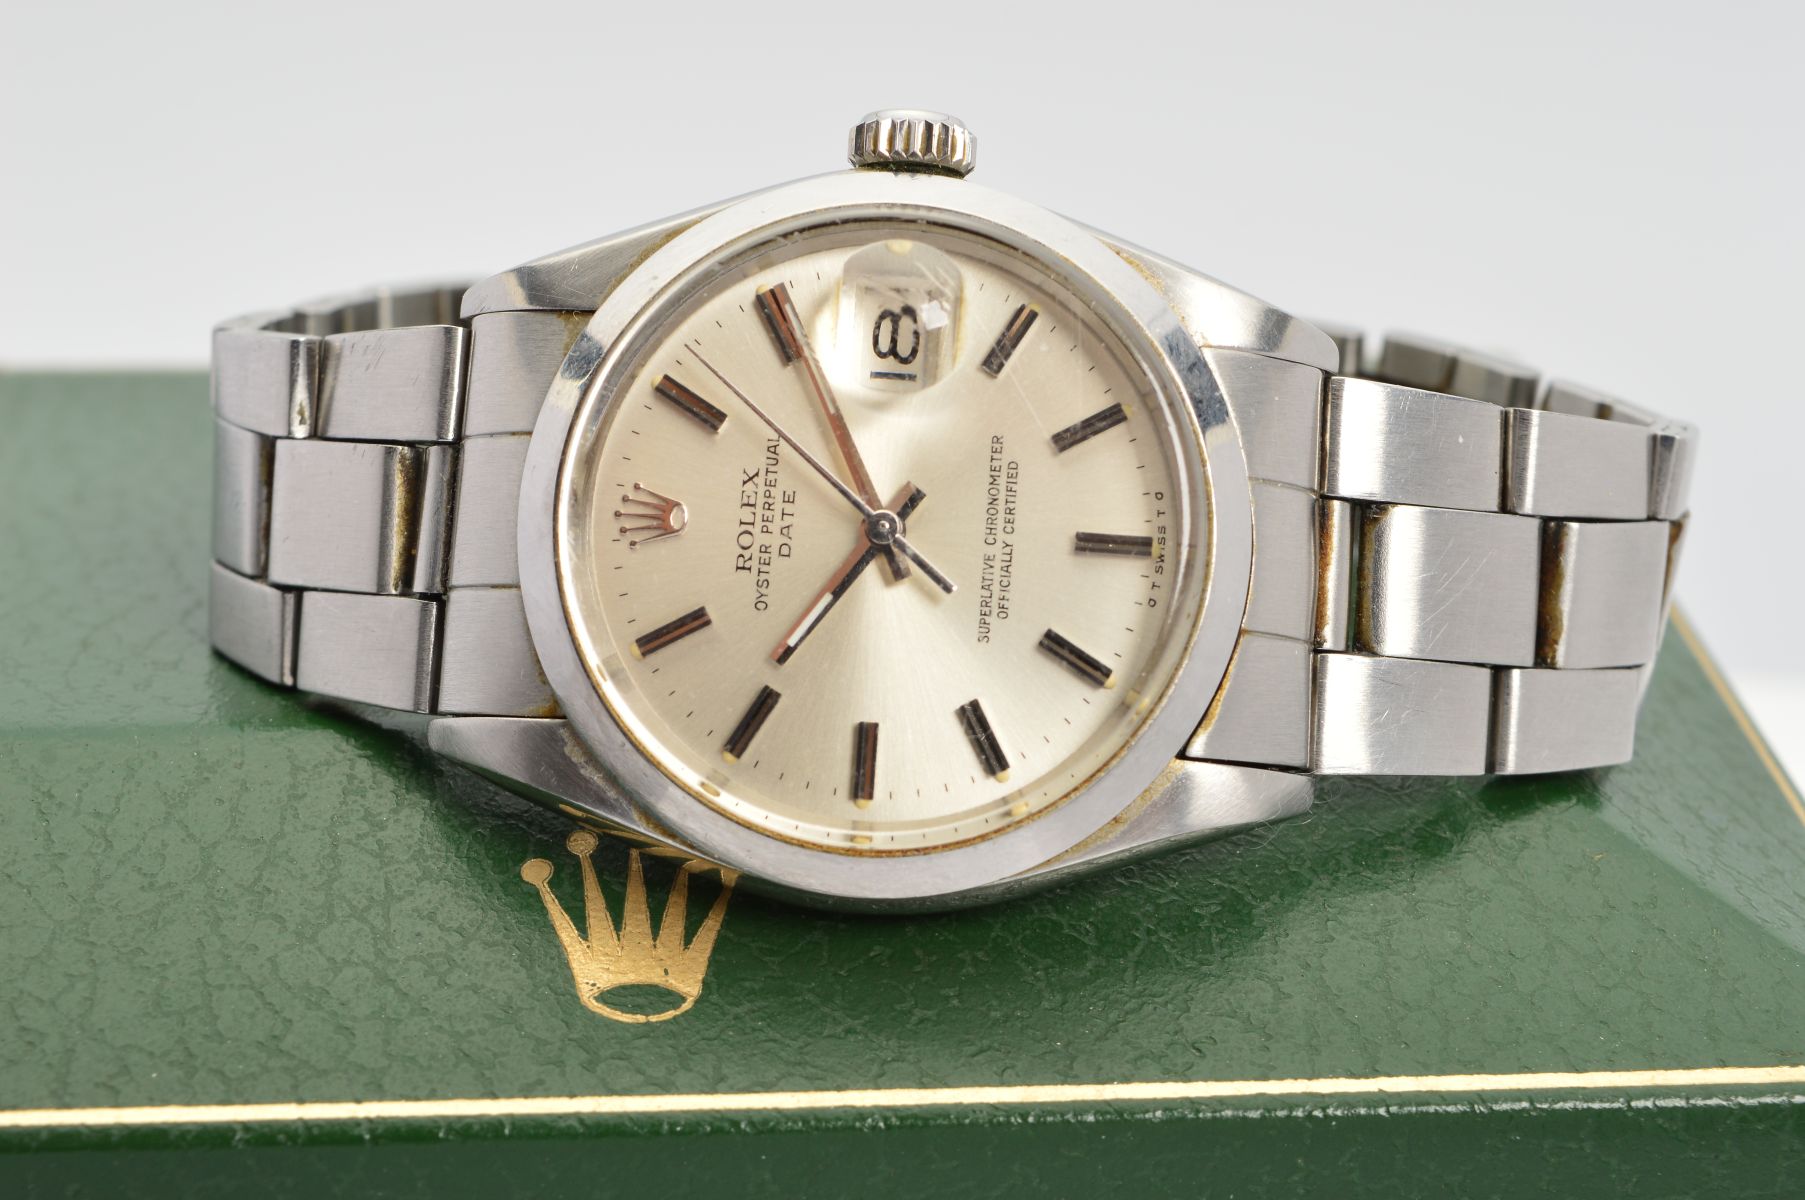 A ROLEX OYSTER PERPETUAL DATE WRISTWATCH, silvered dial with batons, cyclops lens at 3 o'clock, - Image 5 of 5